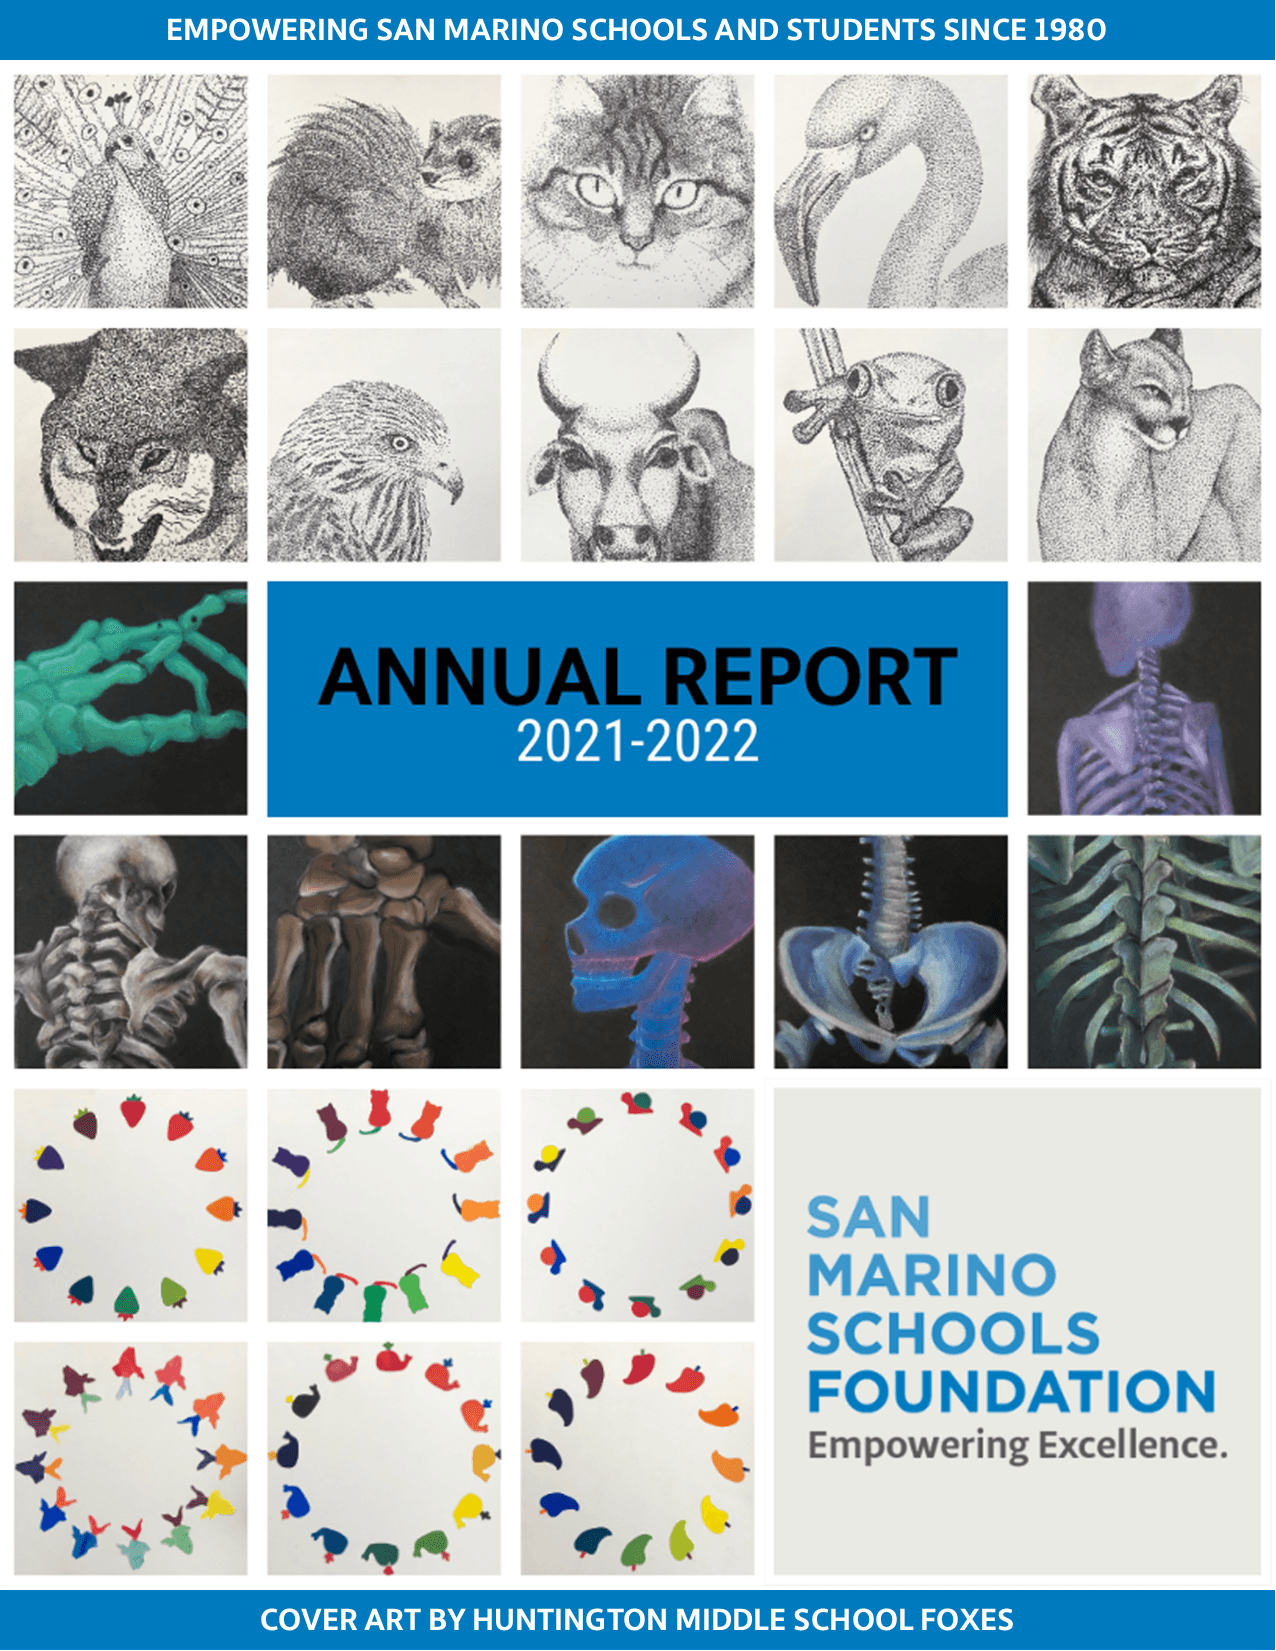 Our 2021-2022 Annual Report is Here!